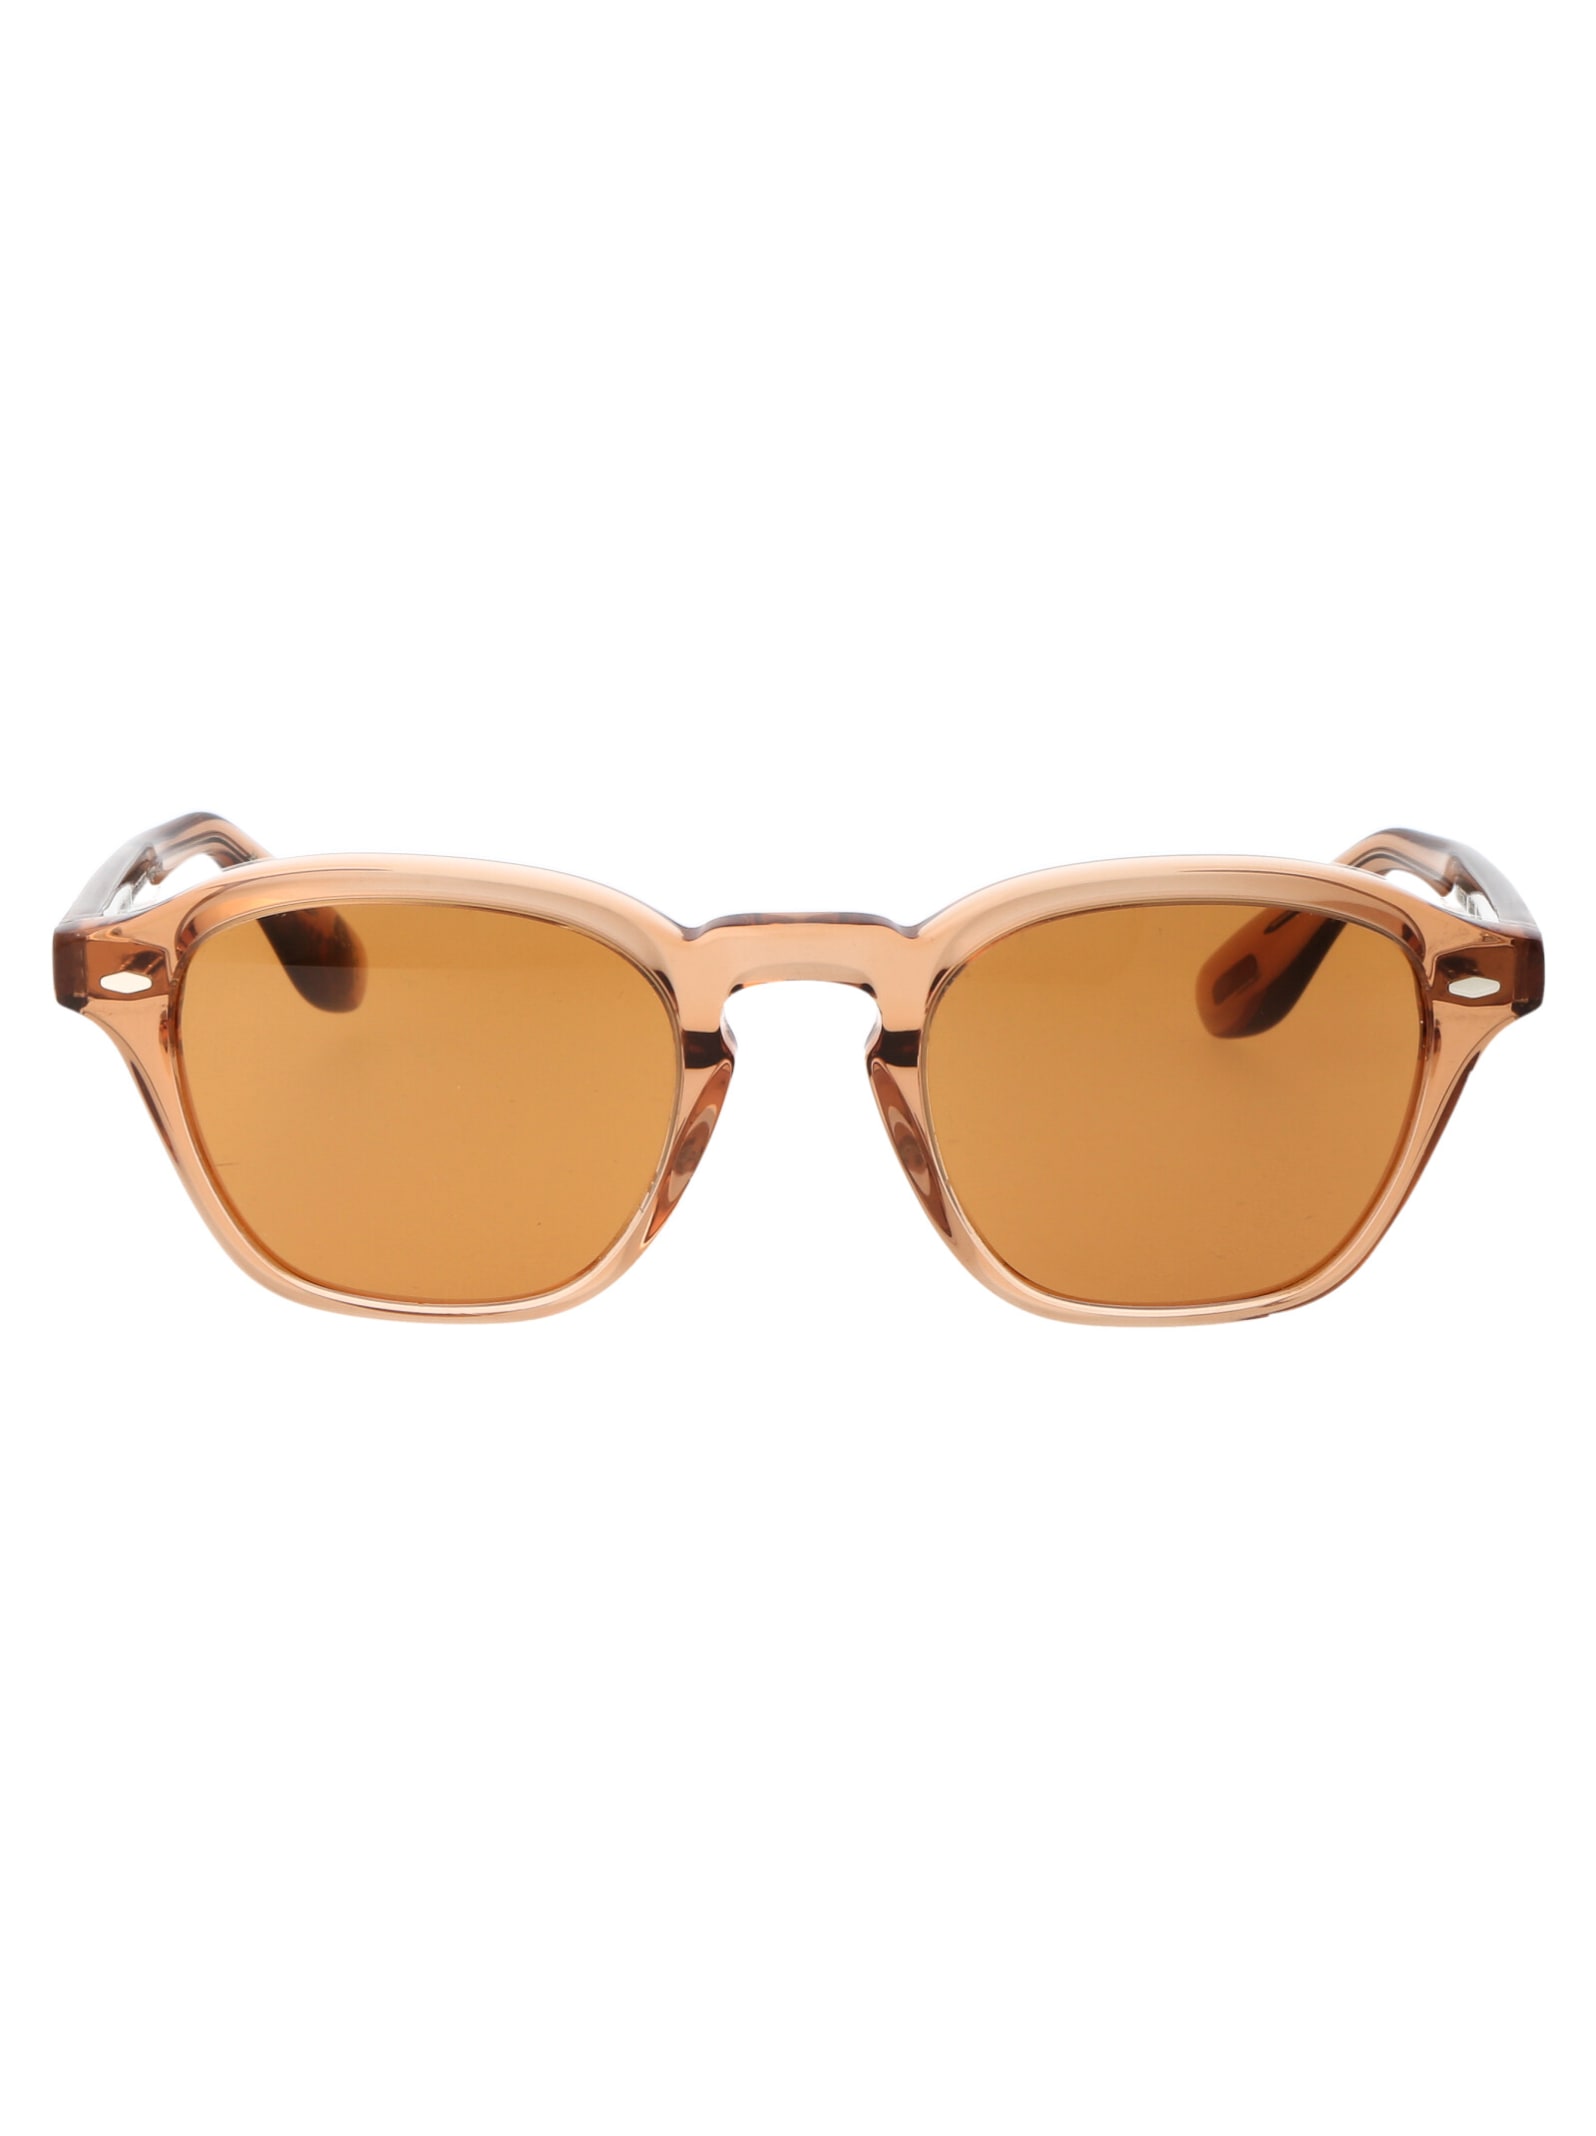 OLIVER PEOPLES PEPPE SUNGLASSES